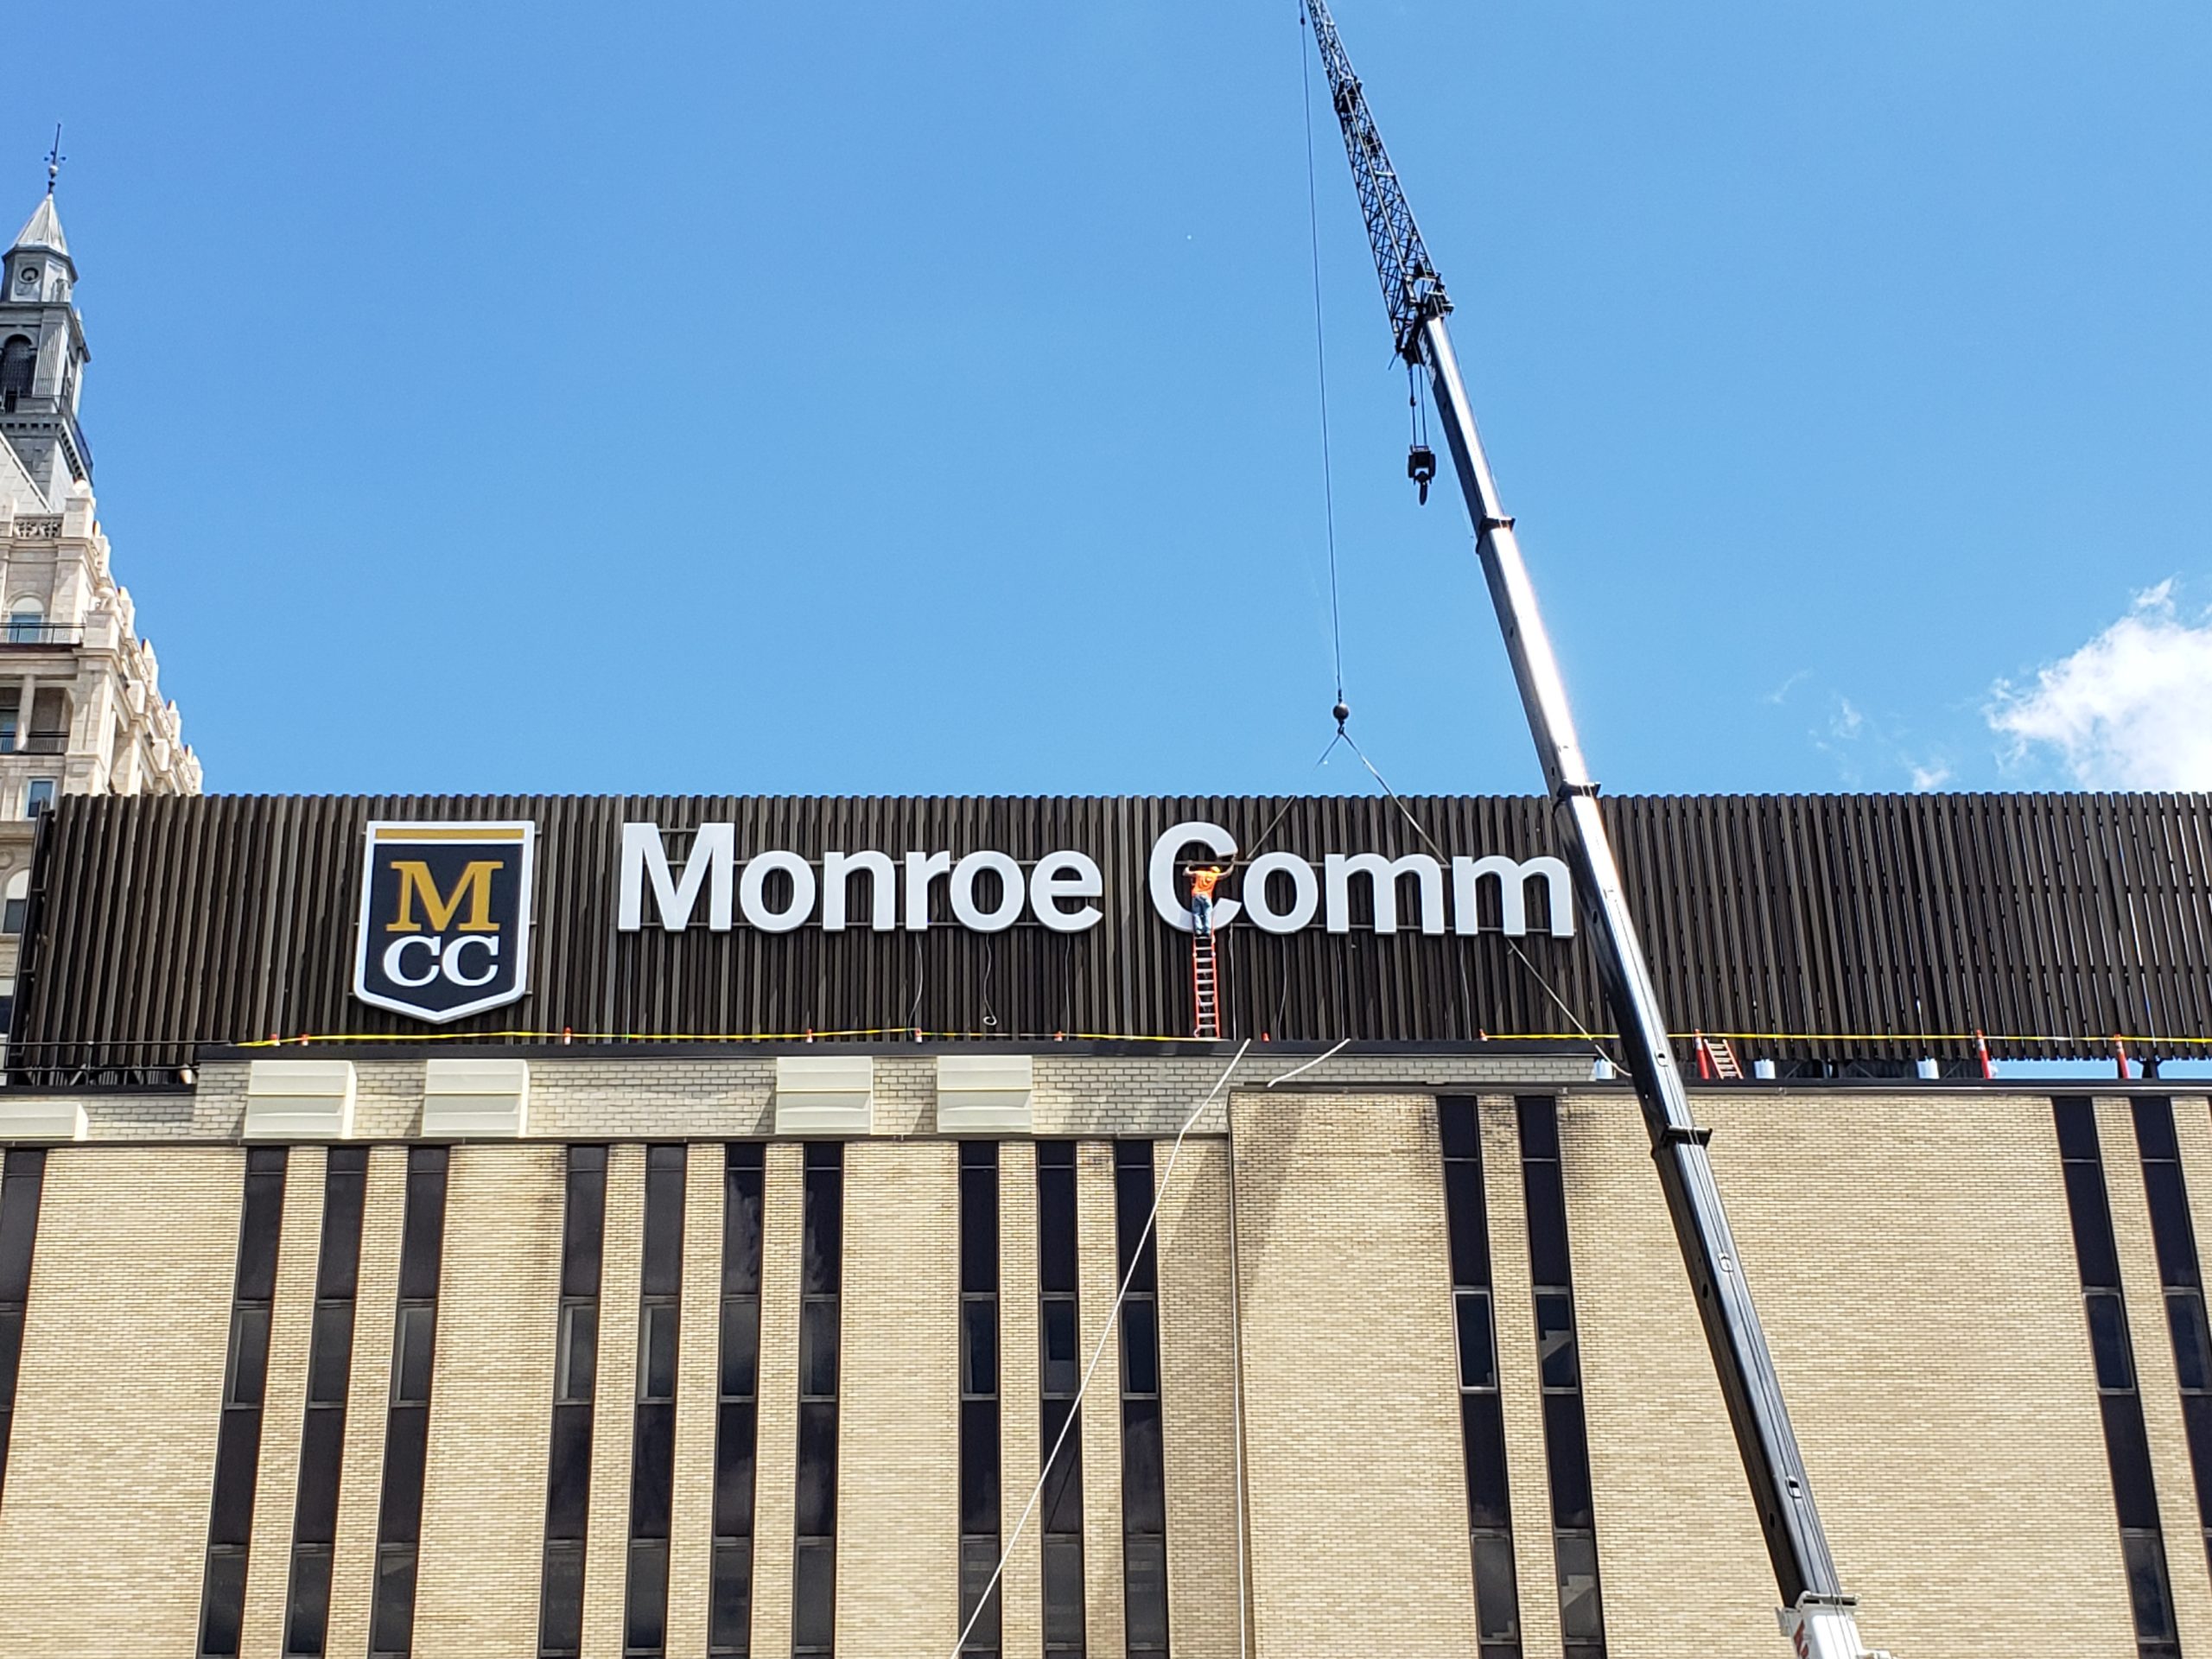 Monroe Community College sign on building